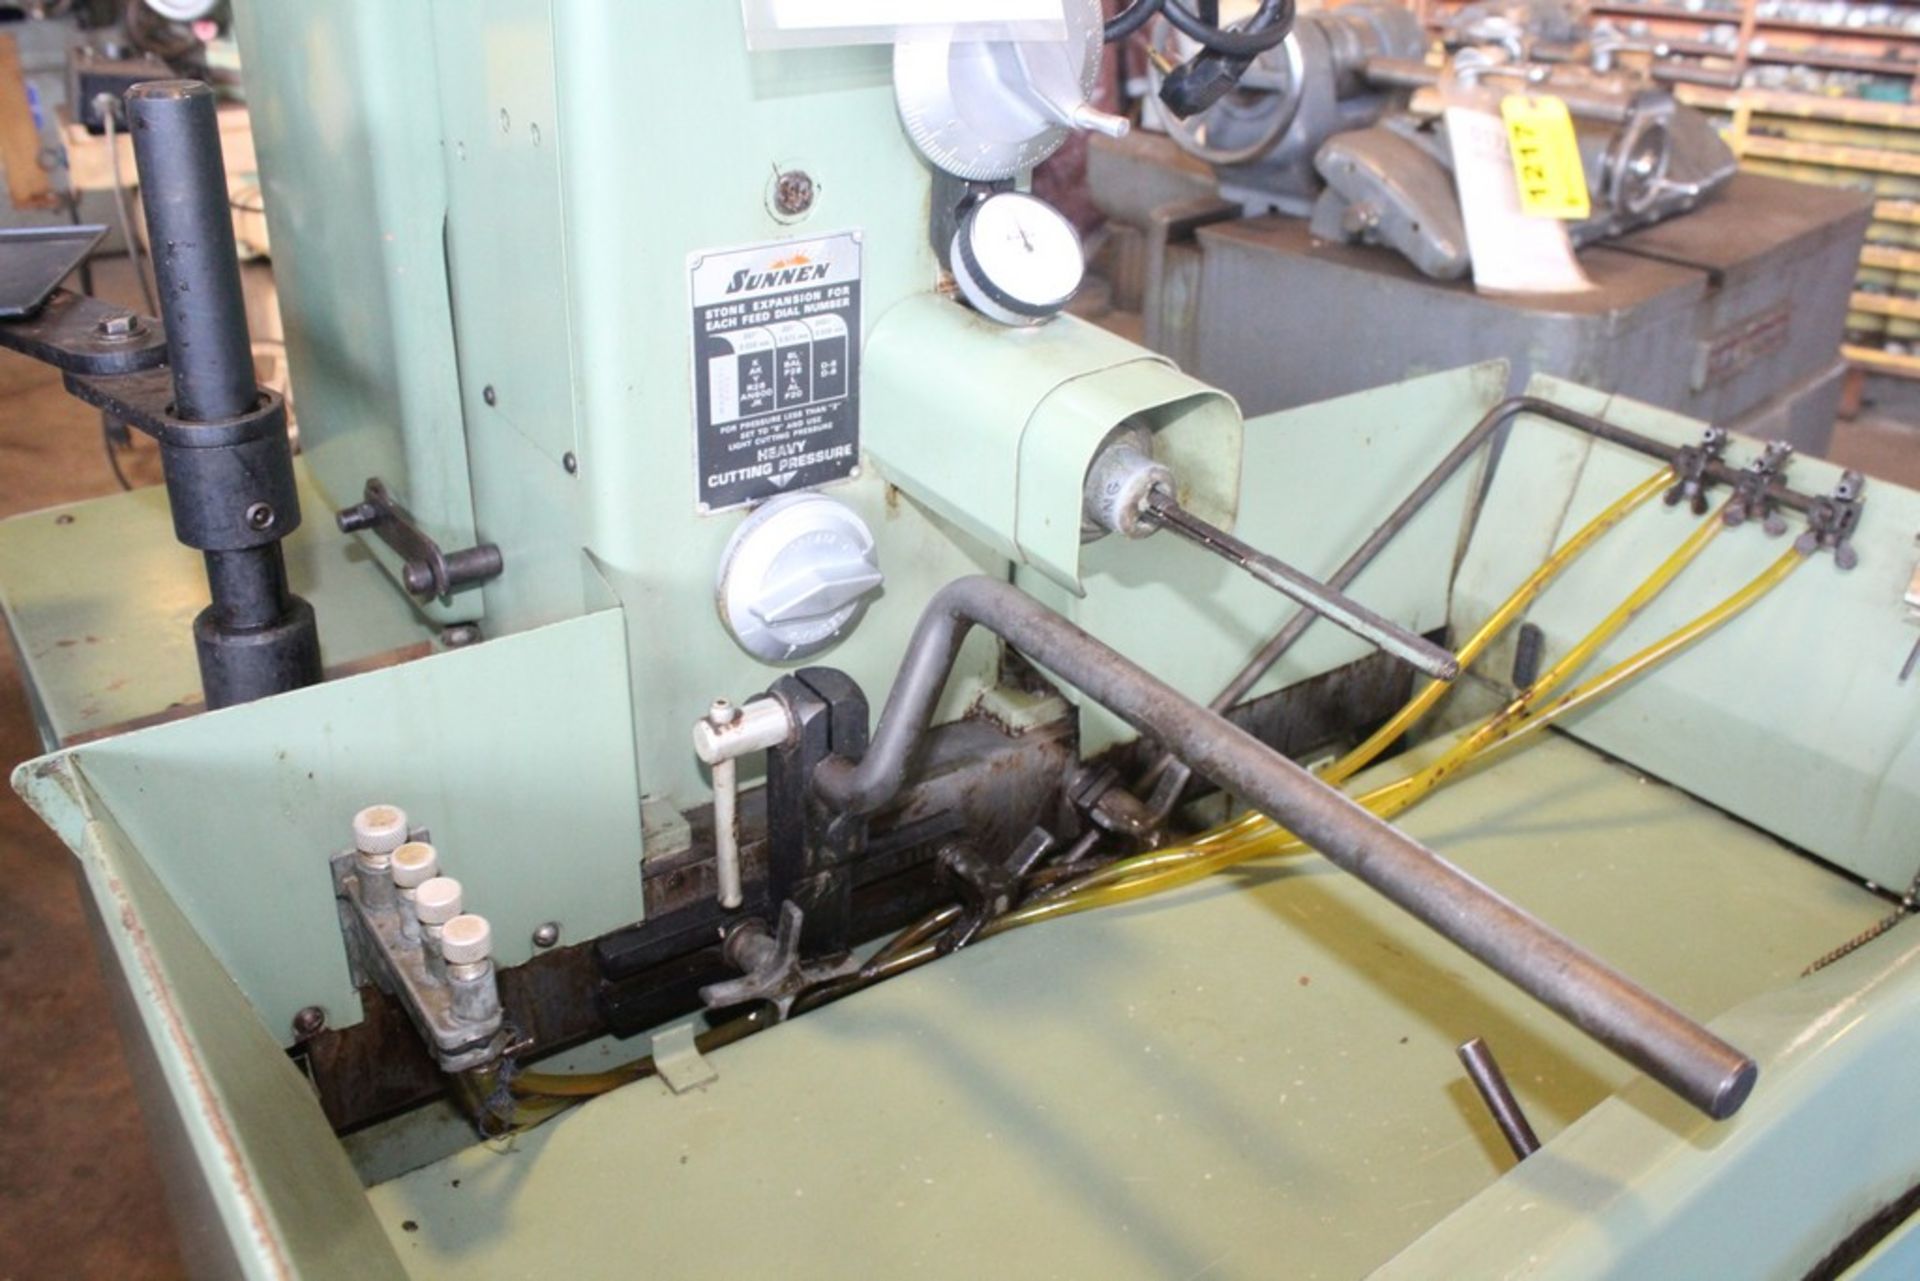 SUNNEN MODEL MBB-1660 PRECISION HORIZONTAL HONING MACHINE, S/N 86658 (1986), EQUIPPED WITH - Image 6 of 6